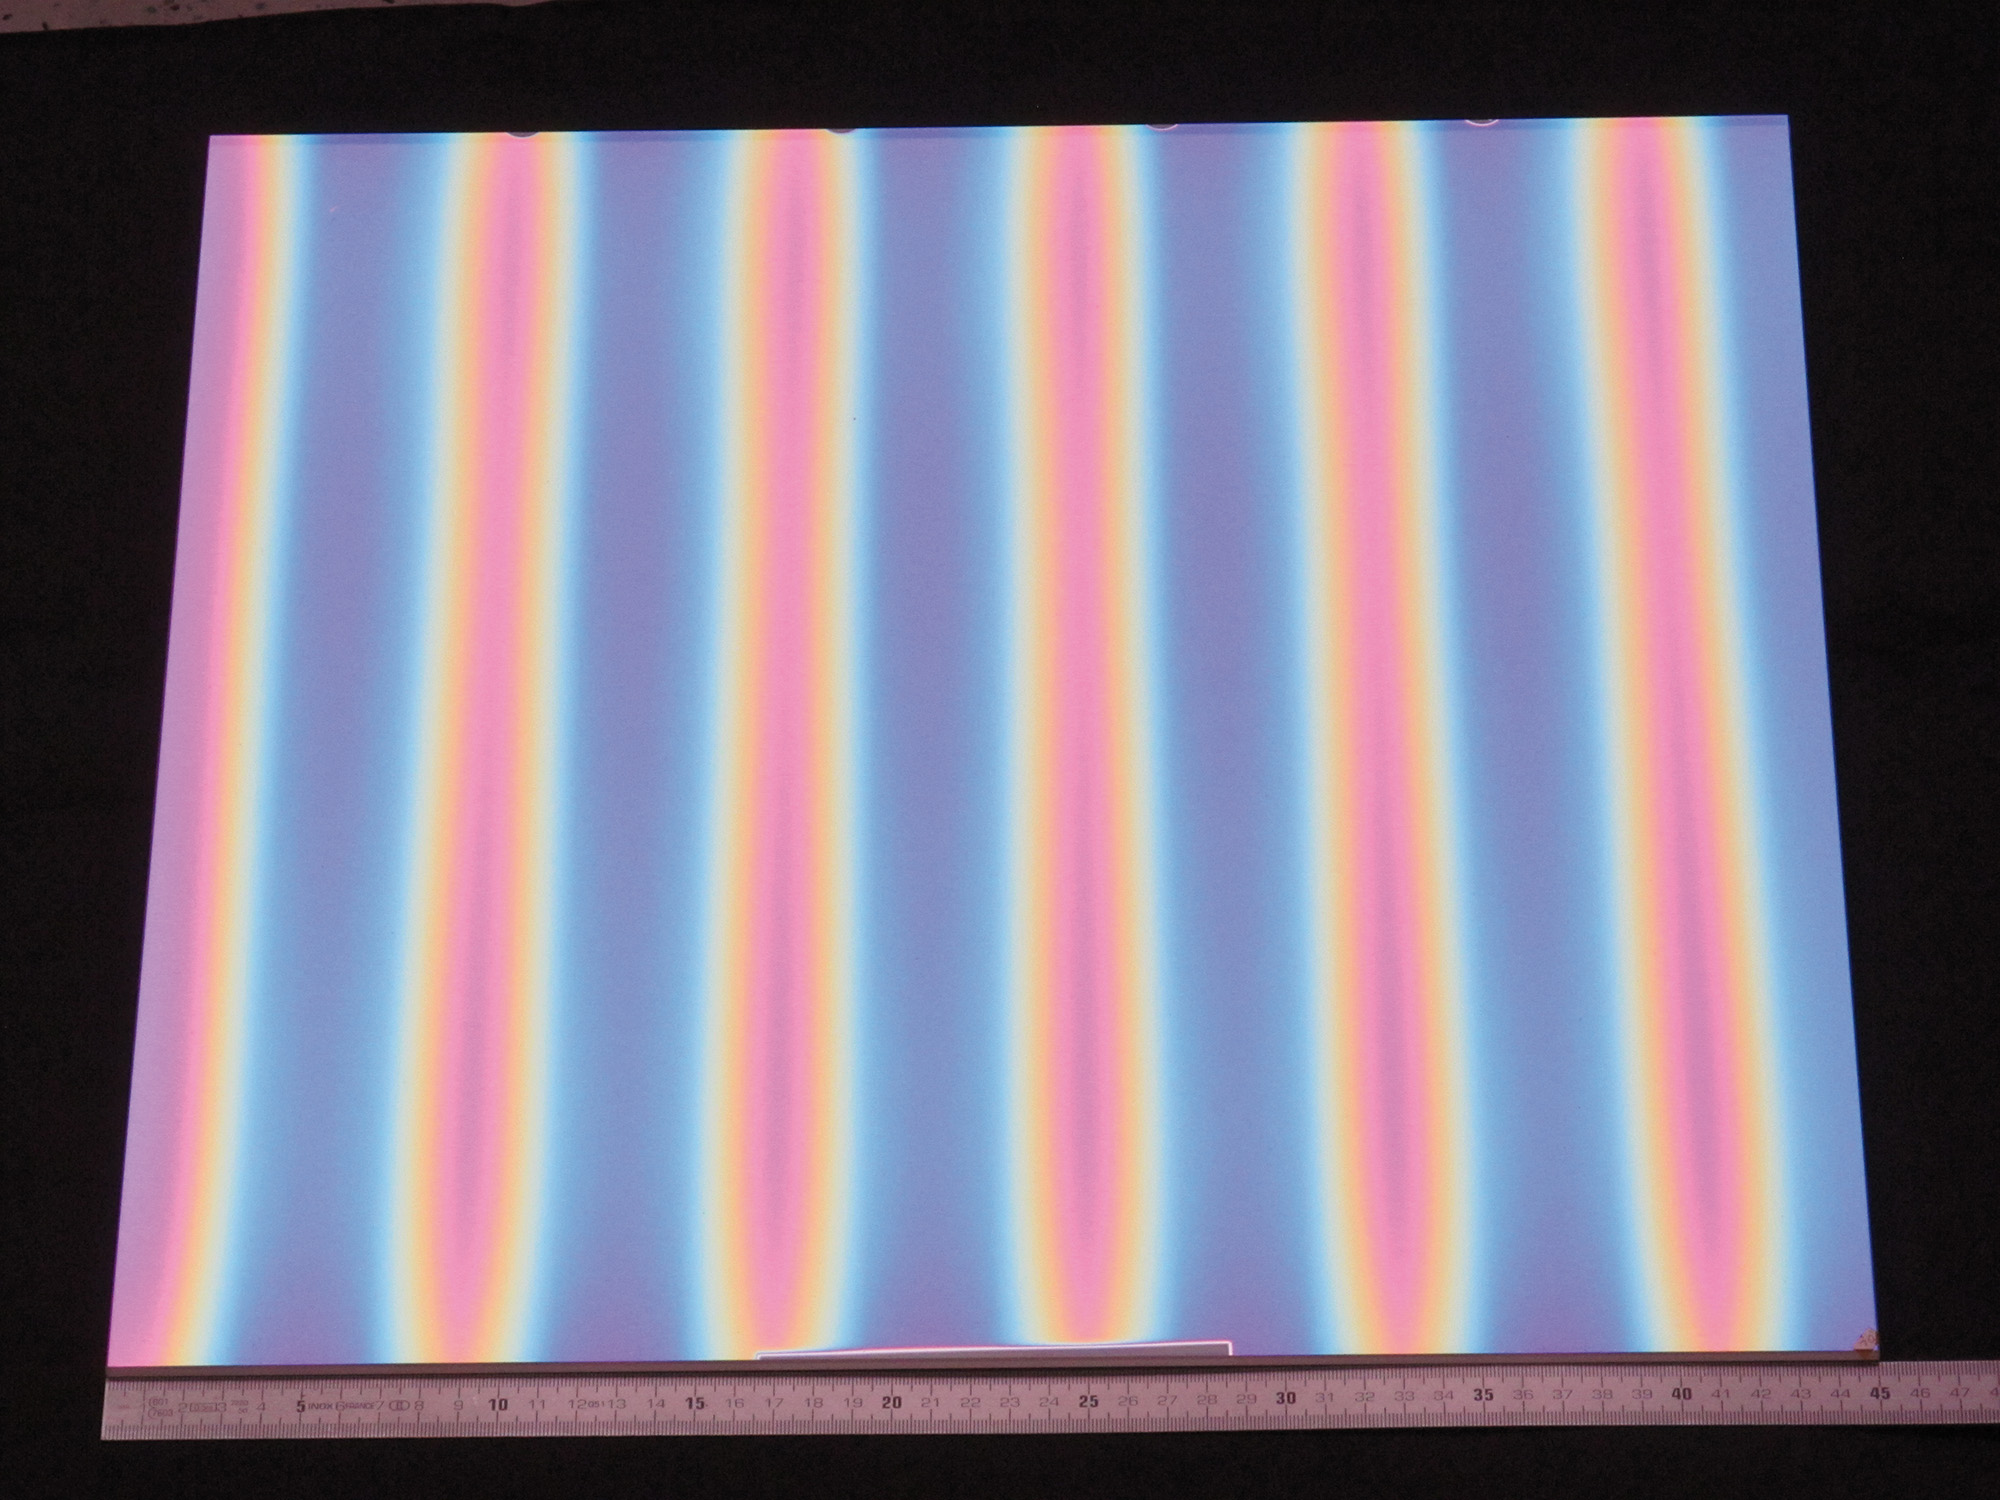 1-dimensional graded, nearly sinusoidal layer thickness curve on glass substrate (450x450 mm).